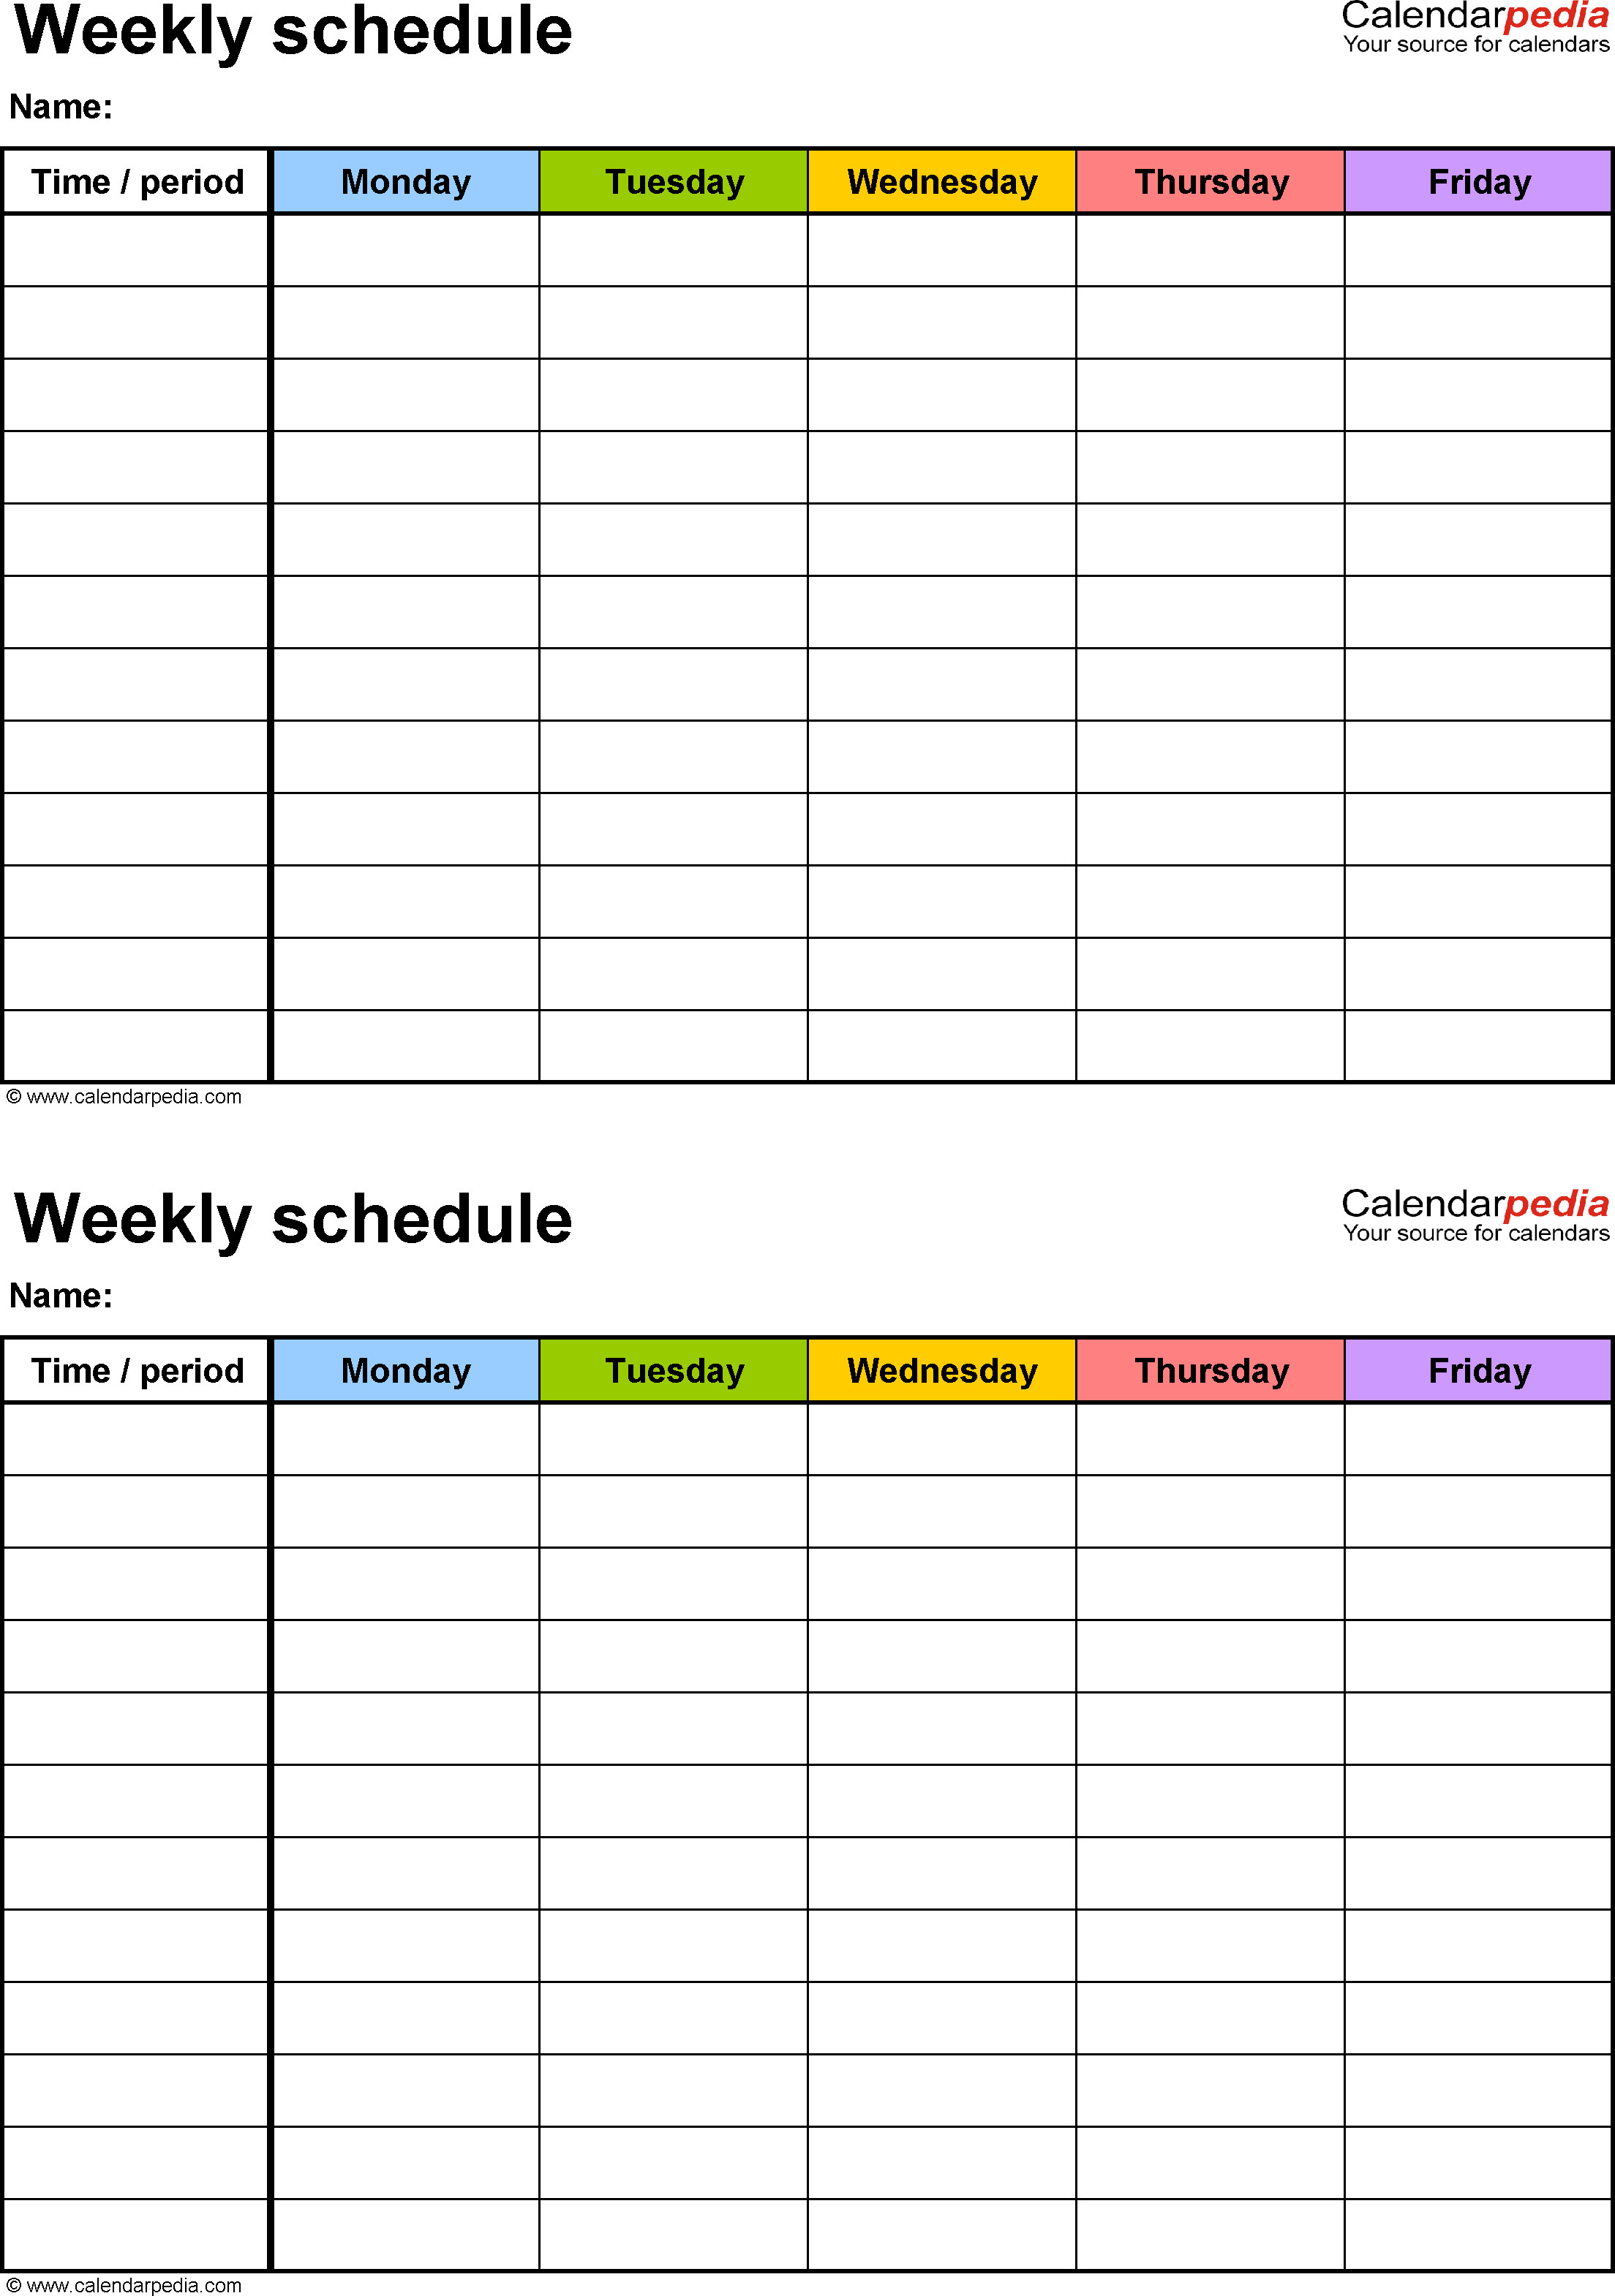 Weekly schedule template for Excel version 3 2 schedules